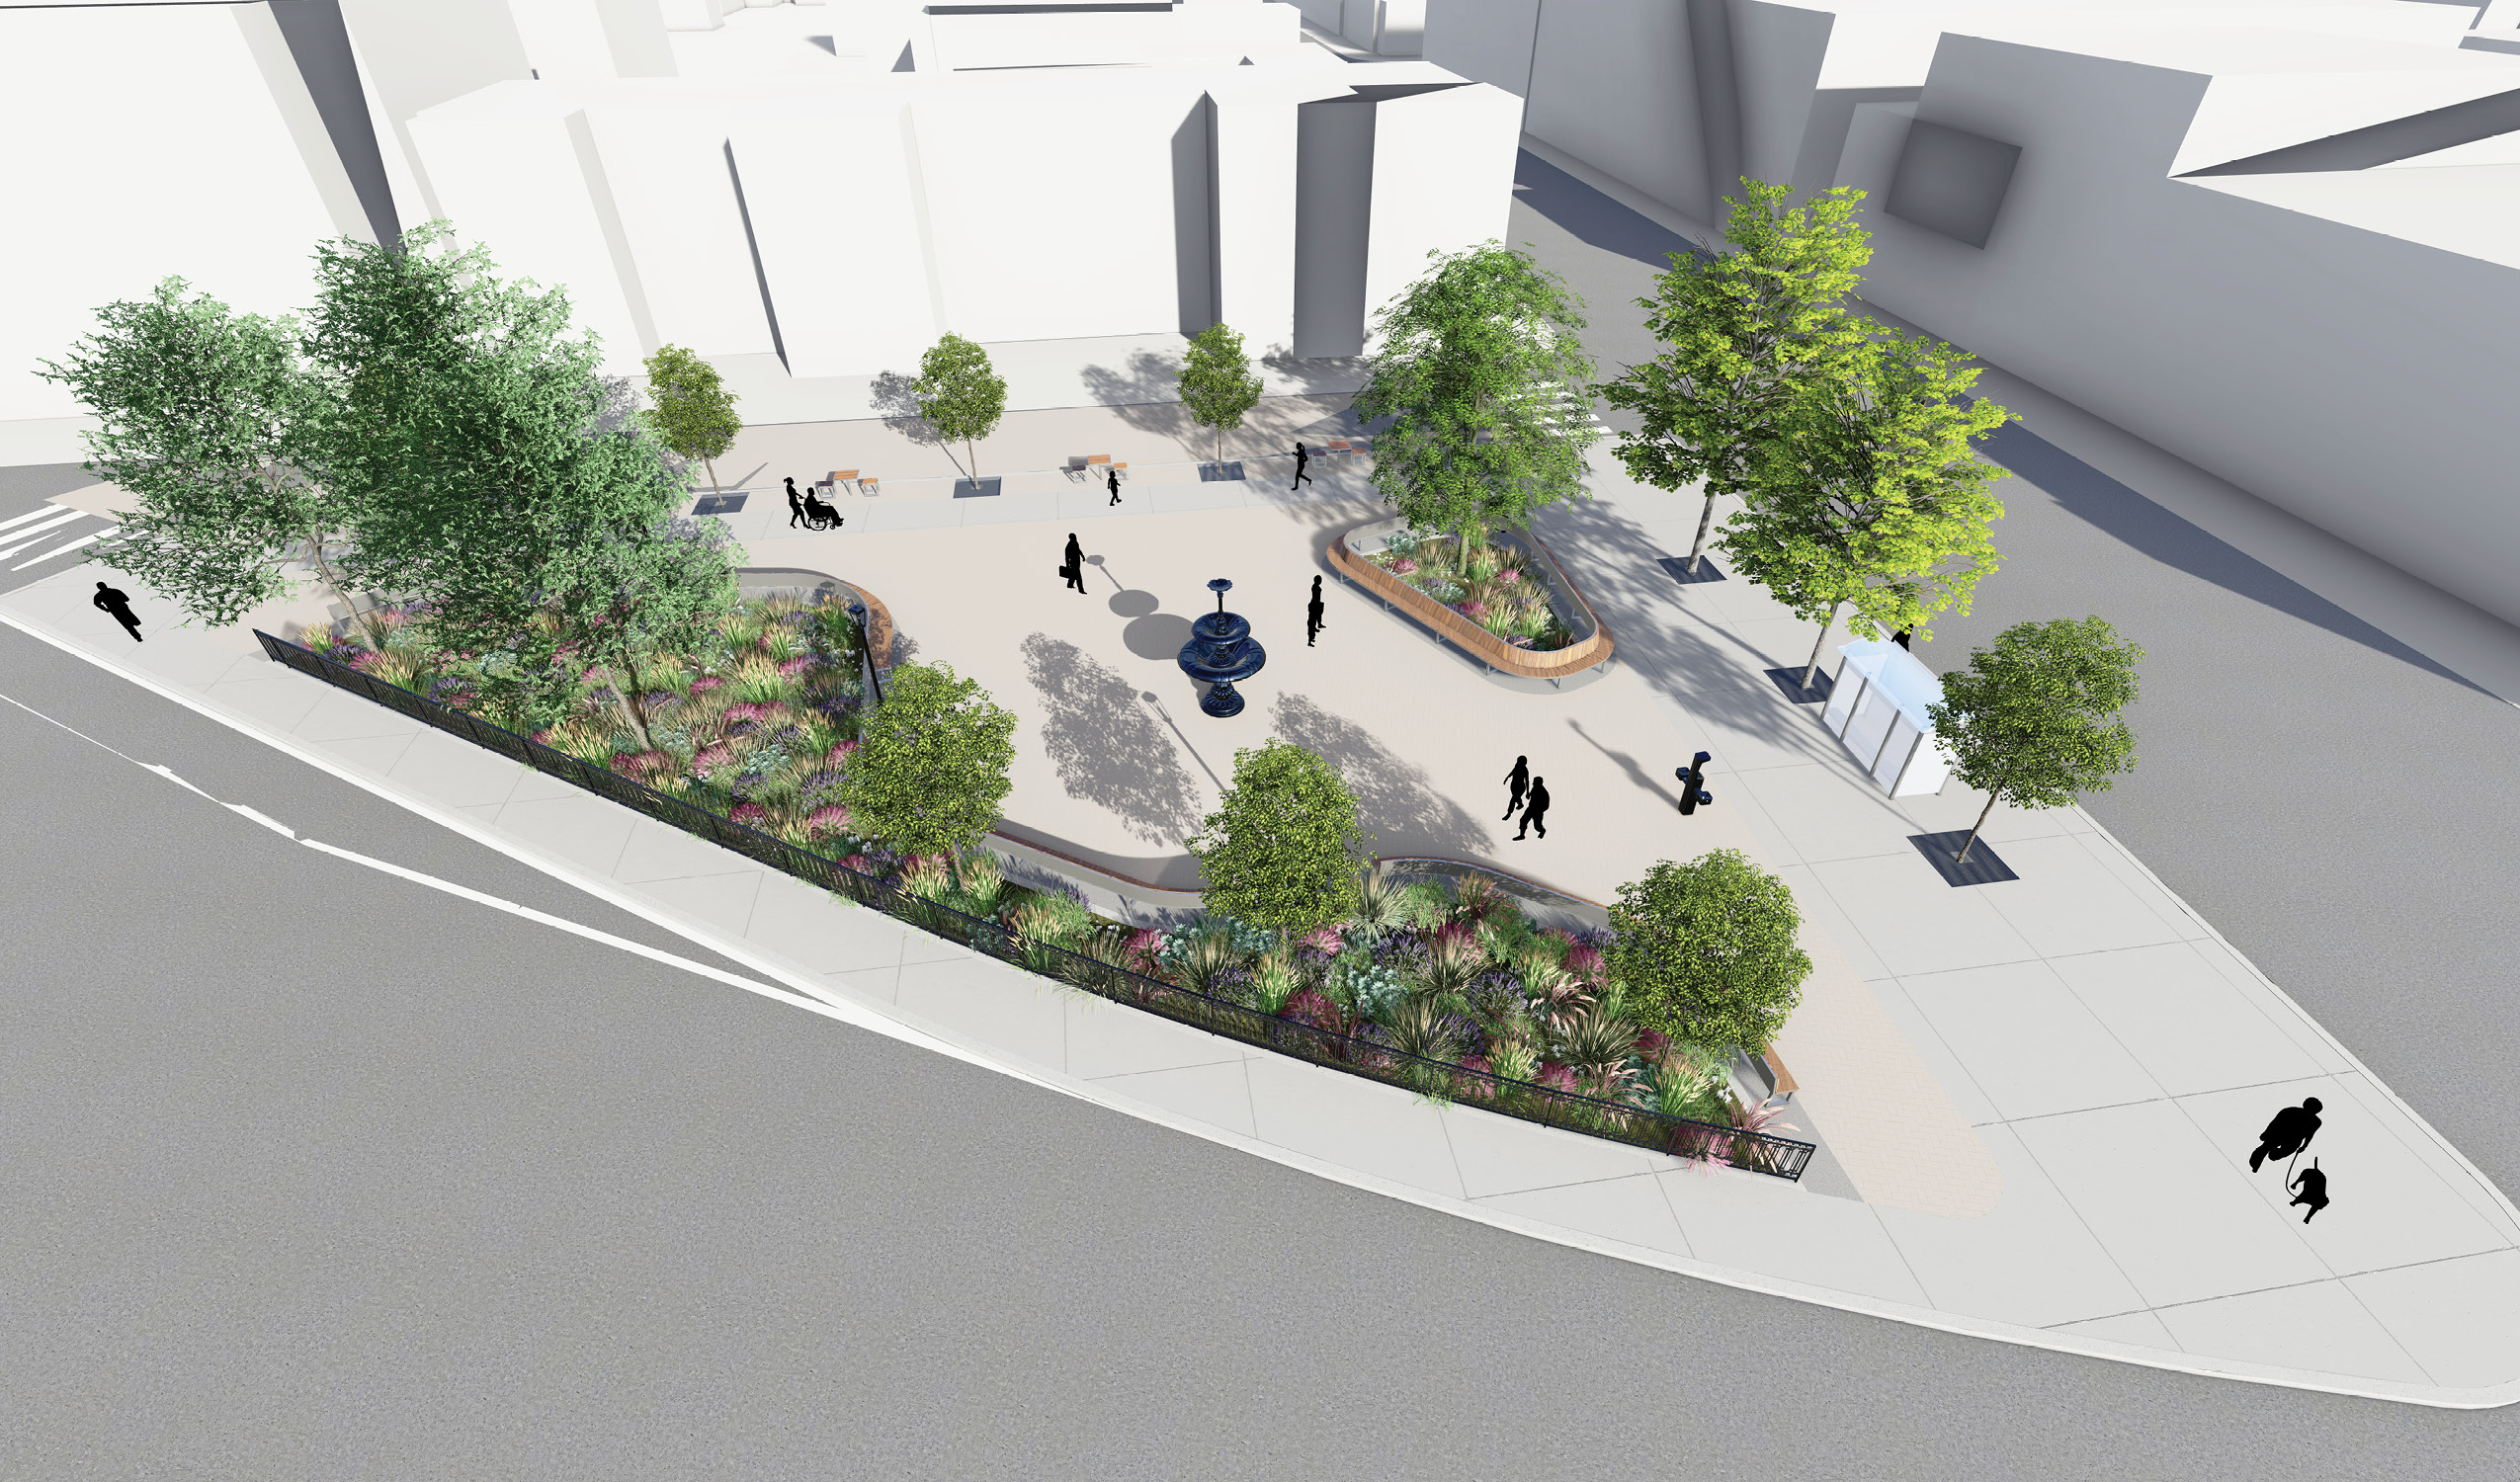 This is a 3D rendering of a future Anniversary Park with trees, benches, and people walking around. The park is located on a curved street (Gerrard Street East) with the Gerrard Street Slip Lane and existing buildings in the background. The park has an ornamental fountain in the center with benches around it. The park has a variety of trees and shrubs, including thornless honeylocust trees and pollinator friendly plantings. There are people walking around the park, some with dogs.